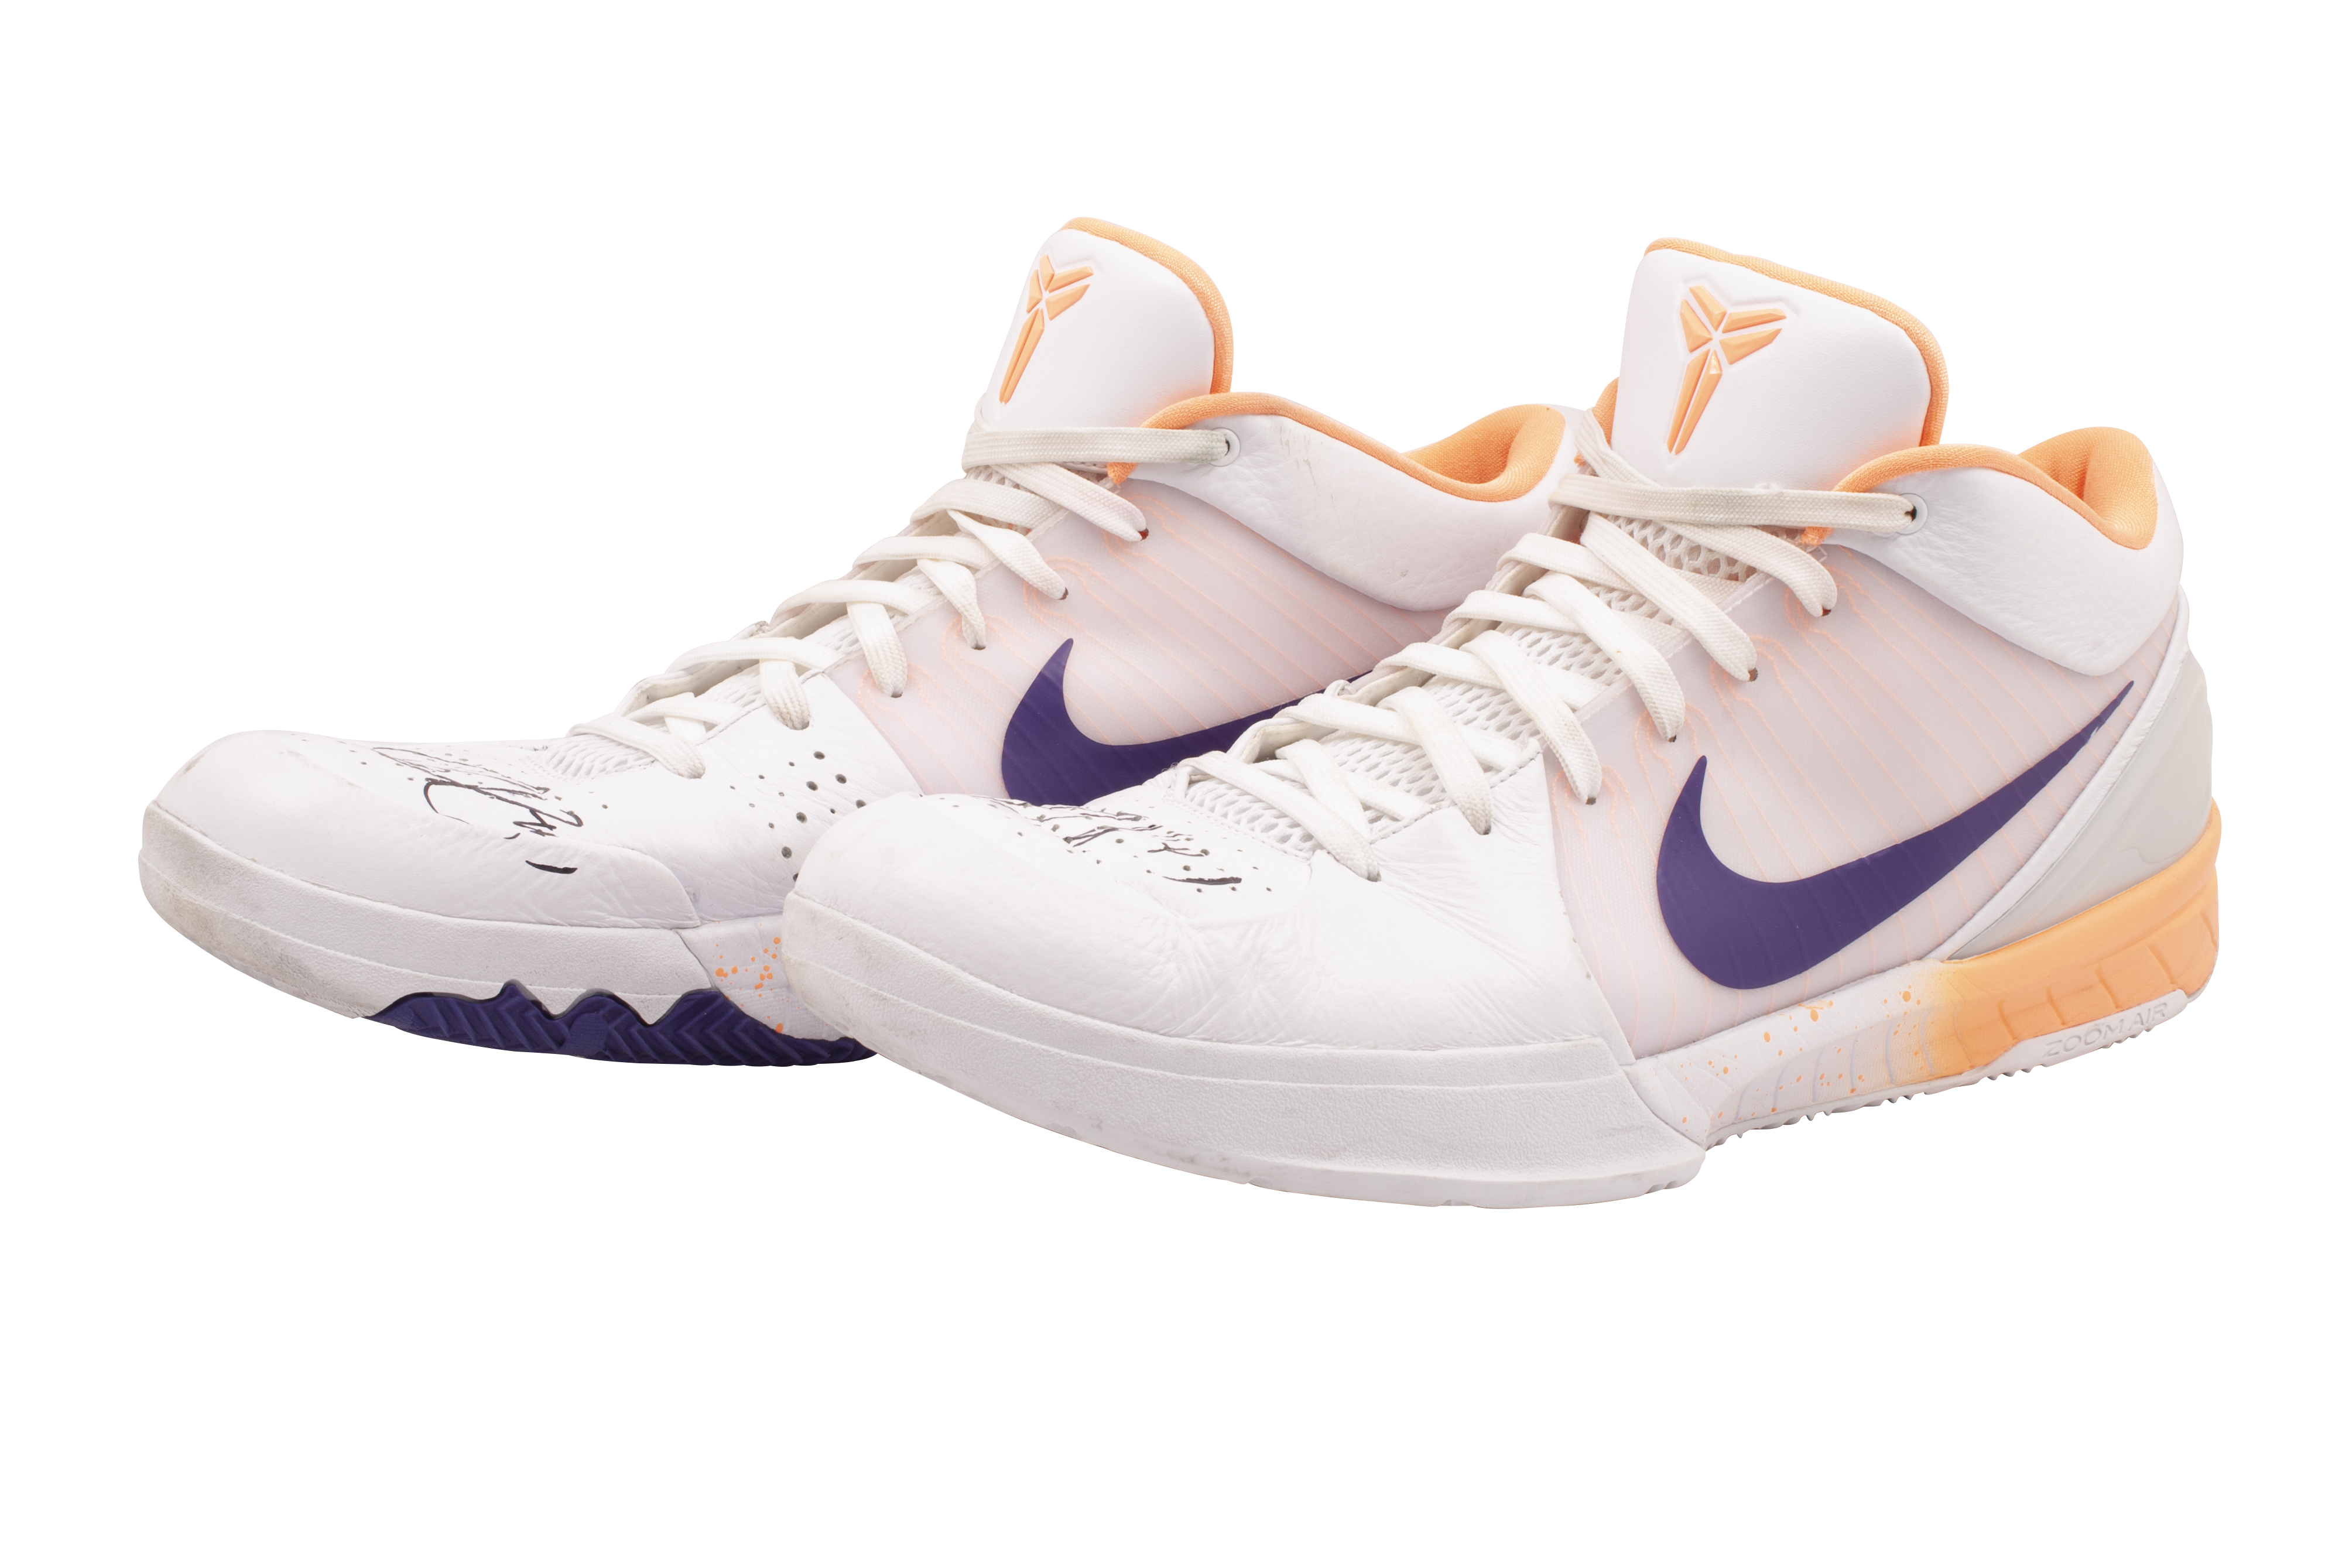 Devin Booker's Signature Shoe With Nike Is Coming Soon - The Ringer